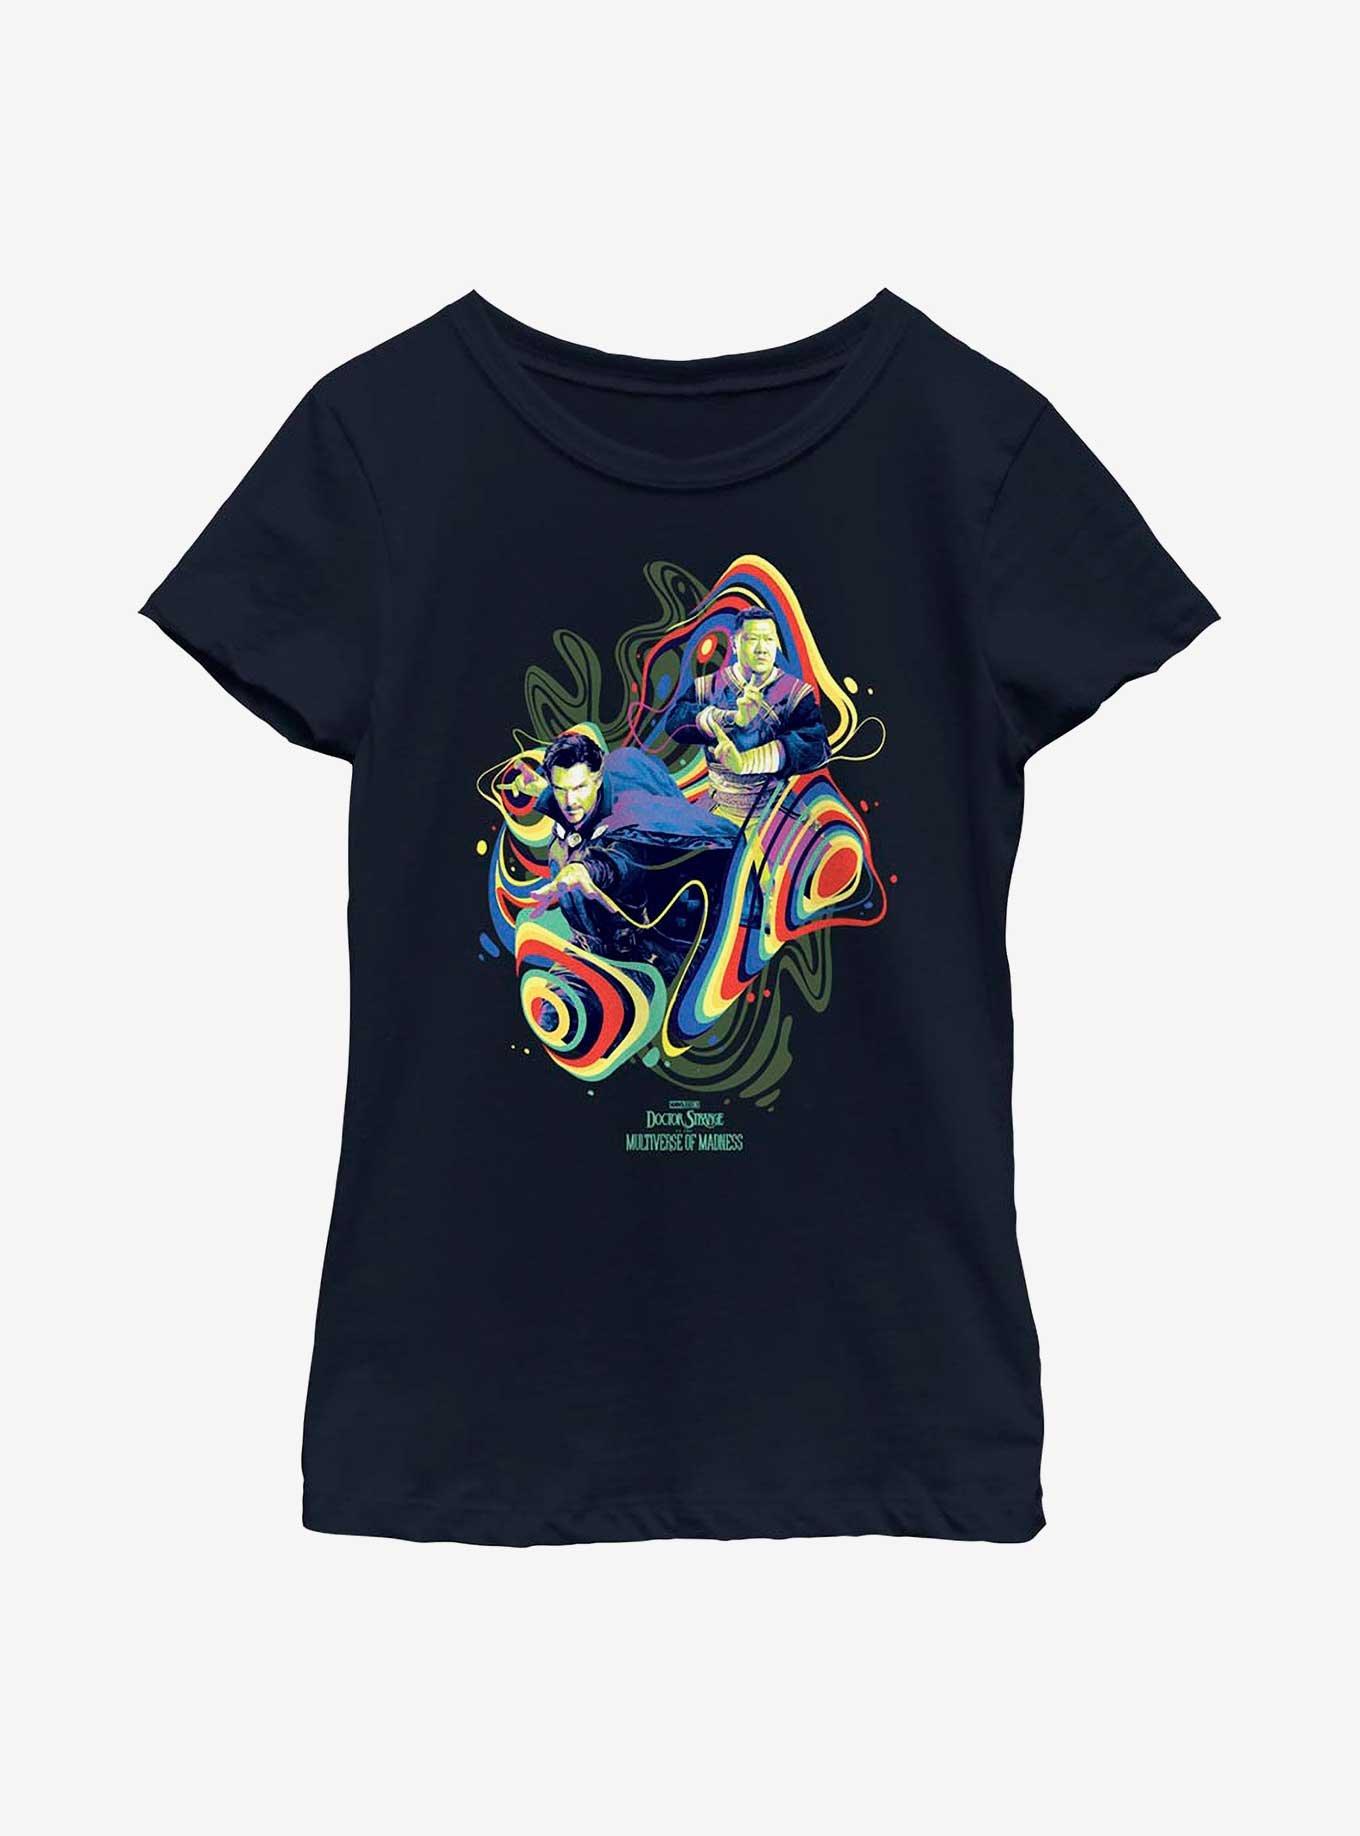 Marvel Doctor Strange In The Multiverse Of Madness Groovy Dr. Strange & Wong Youth Girls T-Shirt, NAVY, hi-res